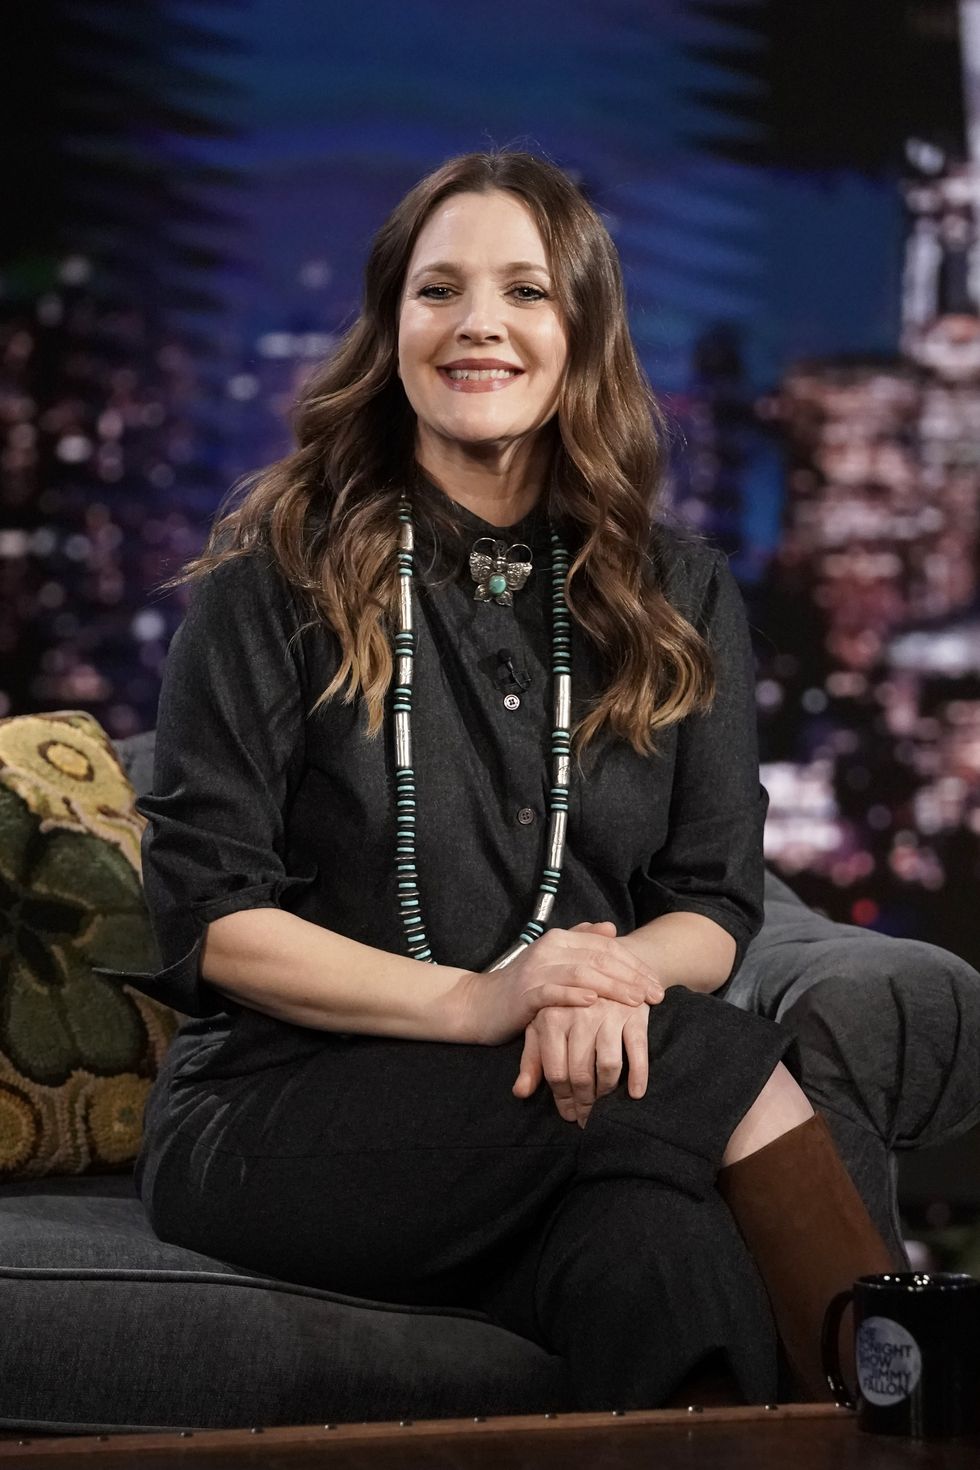 drew-barrymore-reveals-she’s-never-done-plastic-surgery-due-to-her-“addictive-personality”